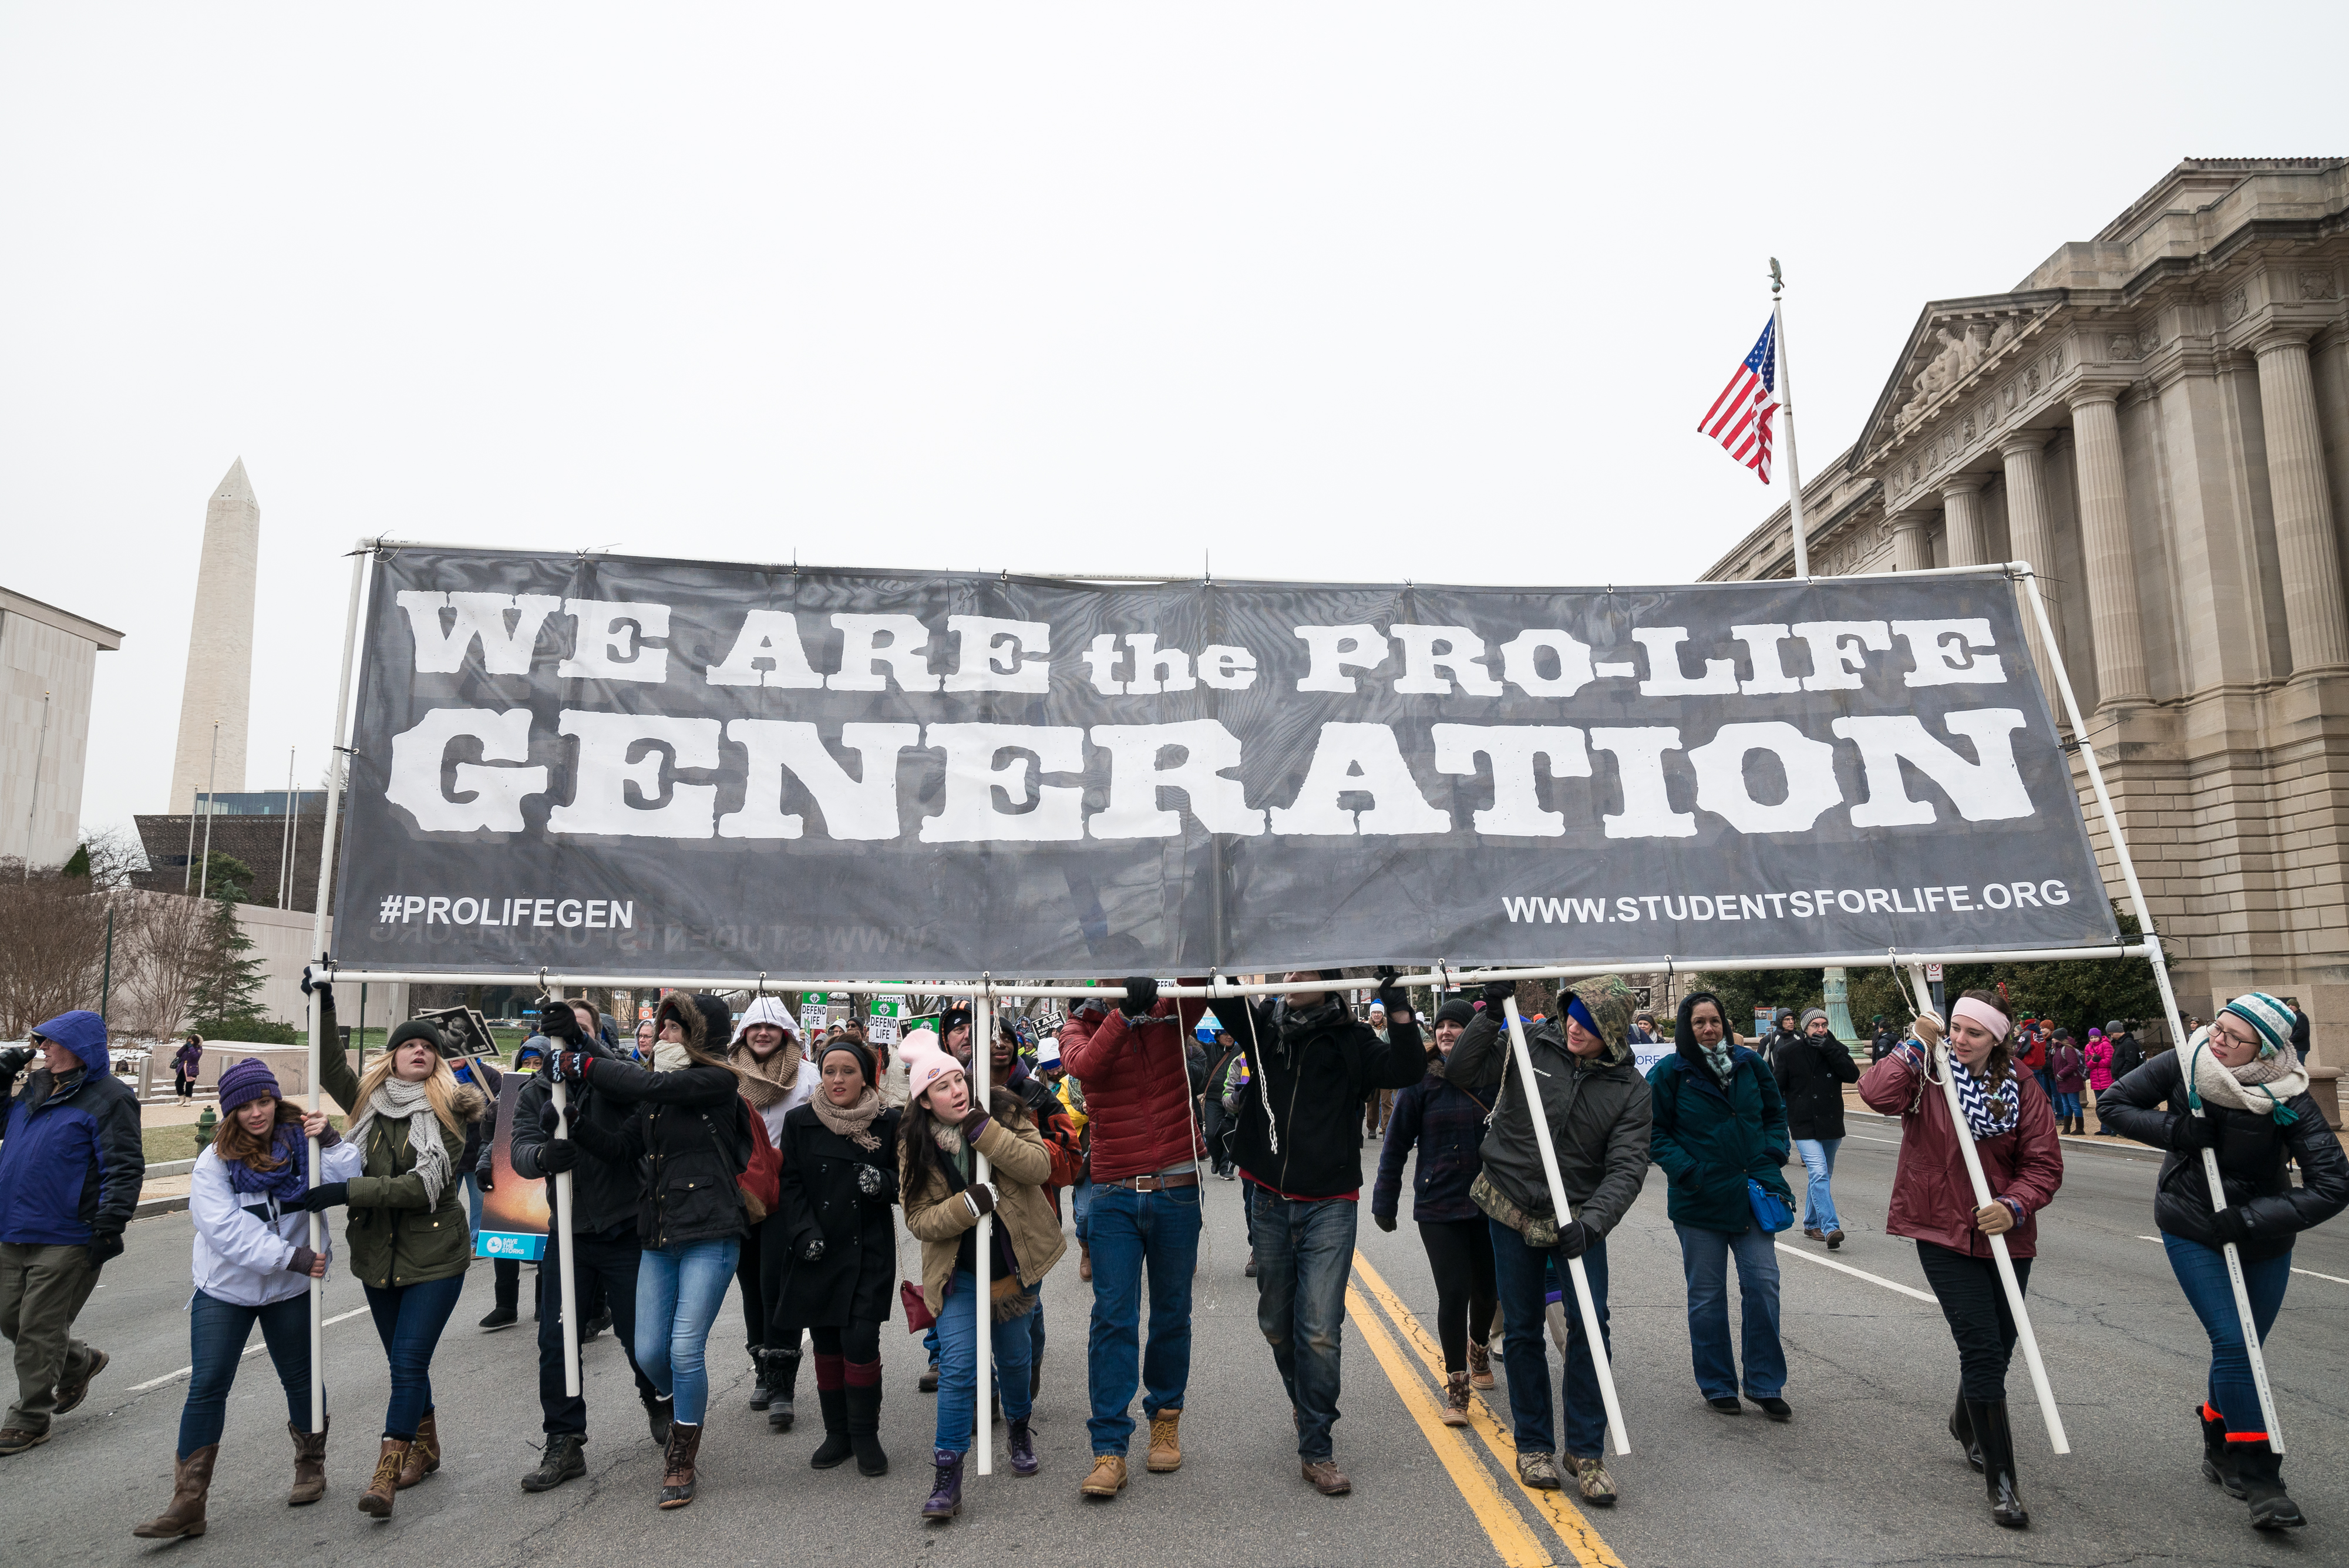 WASHINGTON, D C , UNITED STATES - 2016/01/22: Pro-Life marchers participate in the "March for Life." Tens of thousands of Pro-Life supporters rallied in Washington, D.C. on the anniversary of the landmark 1973 Supreme Court decision Roe v. Wade, demanding an end to legal abortion in the United States. (Photo by Albin Lohr-Jones/Pacific Press/LightRocket via Getty Images) (Pacific Press—LightRocket via Getty Images)